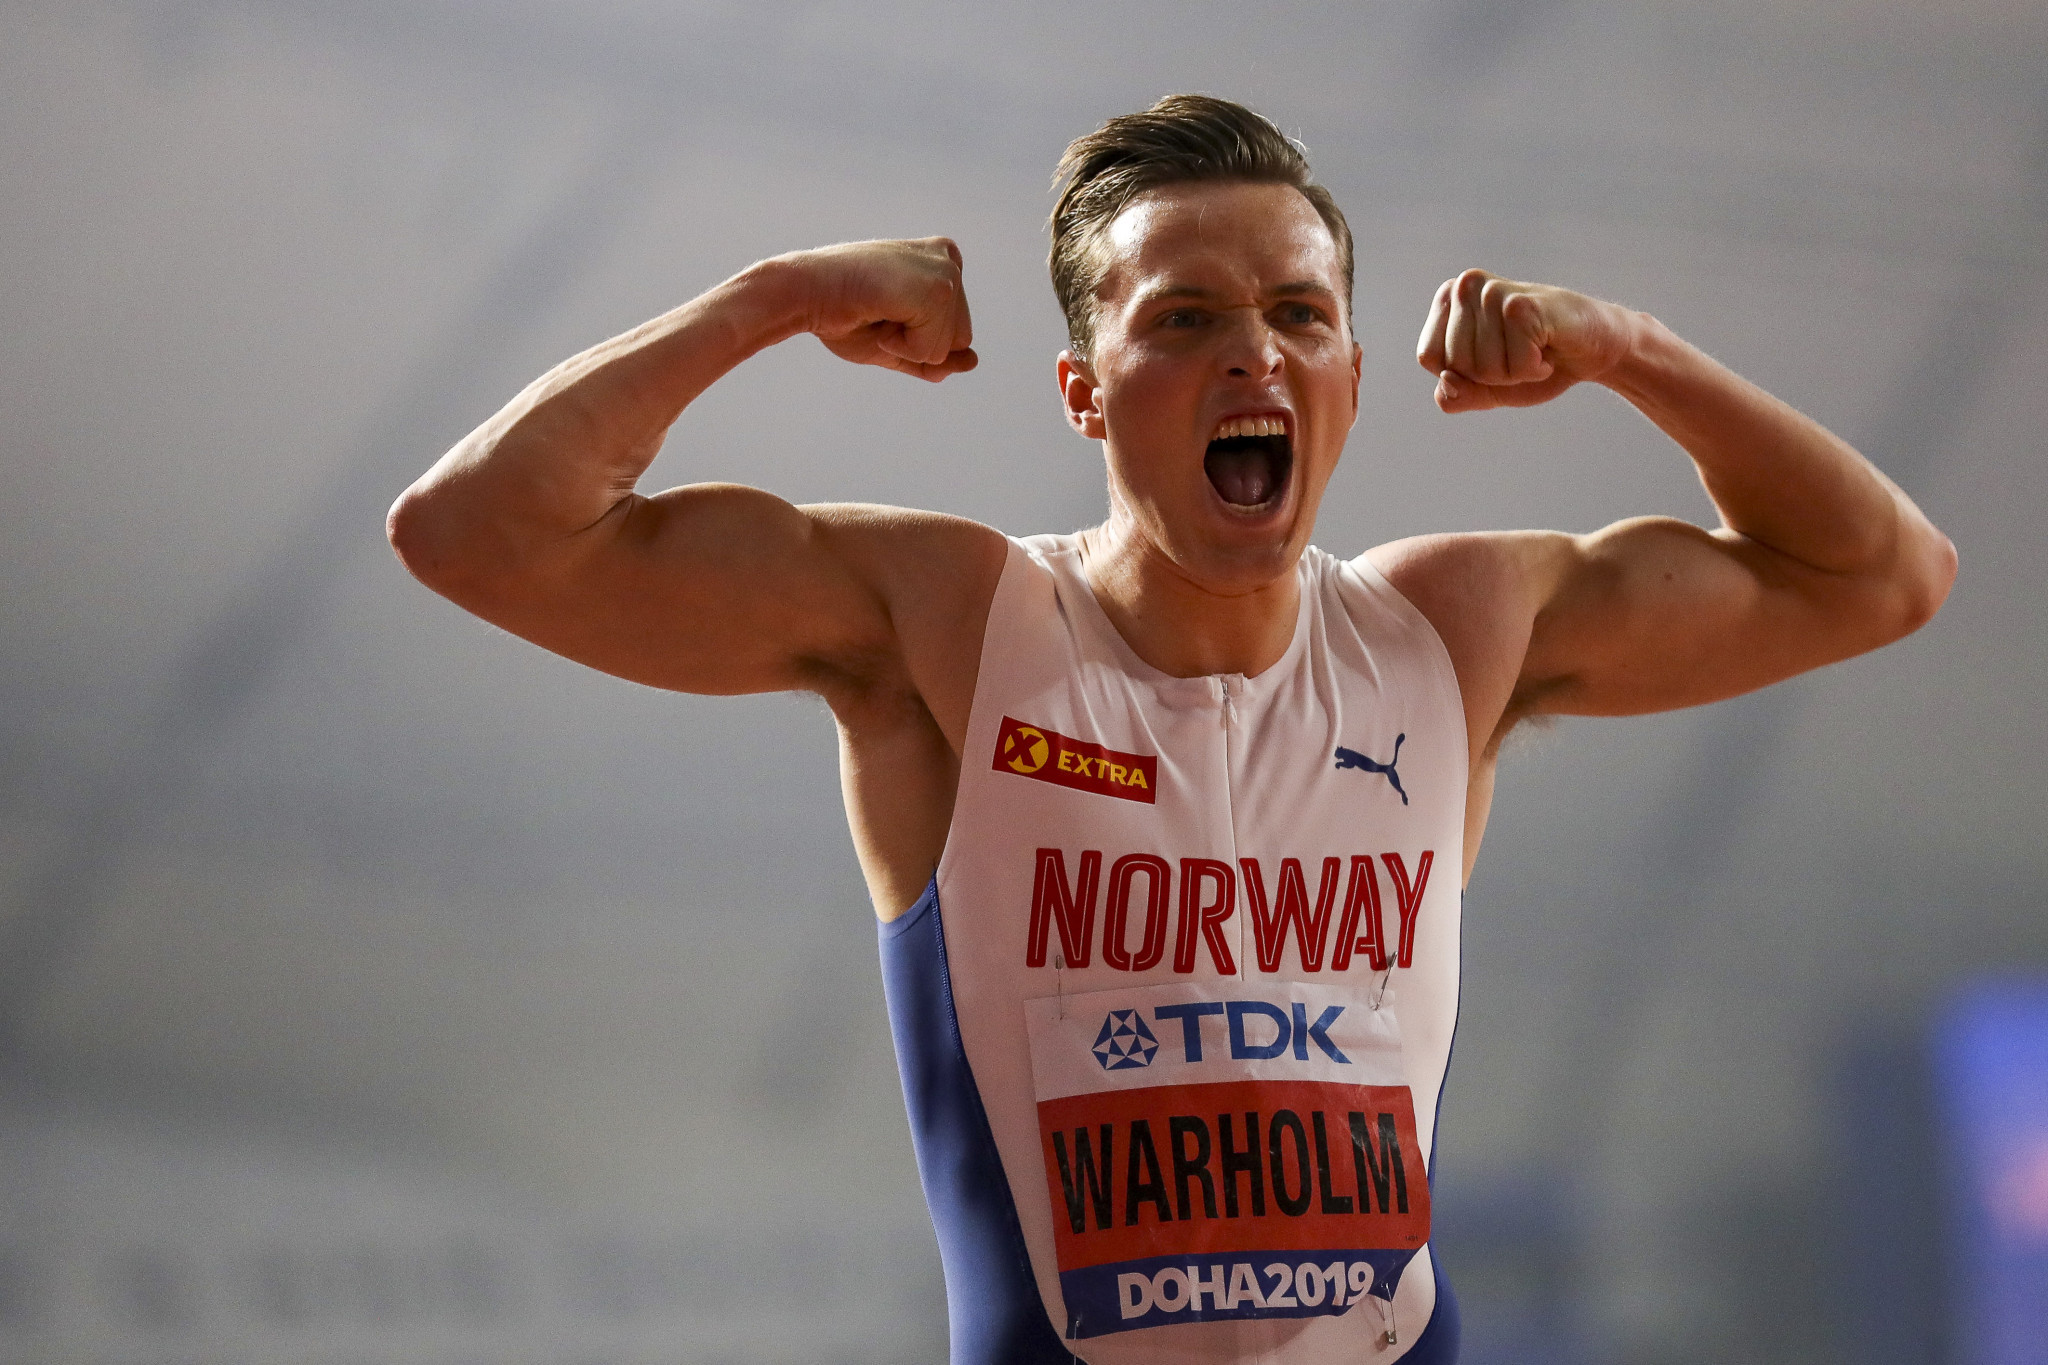 warholm-powers-to-victory-as-qatar-win-first-medal-at-iaaf-world